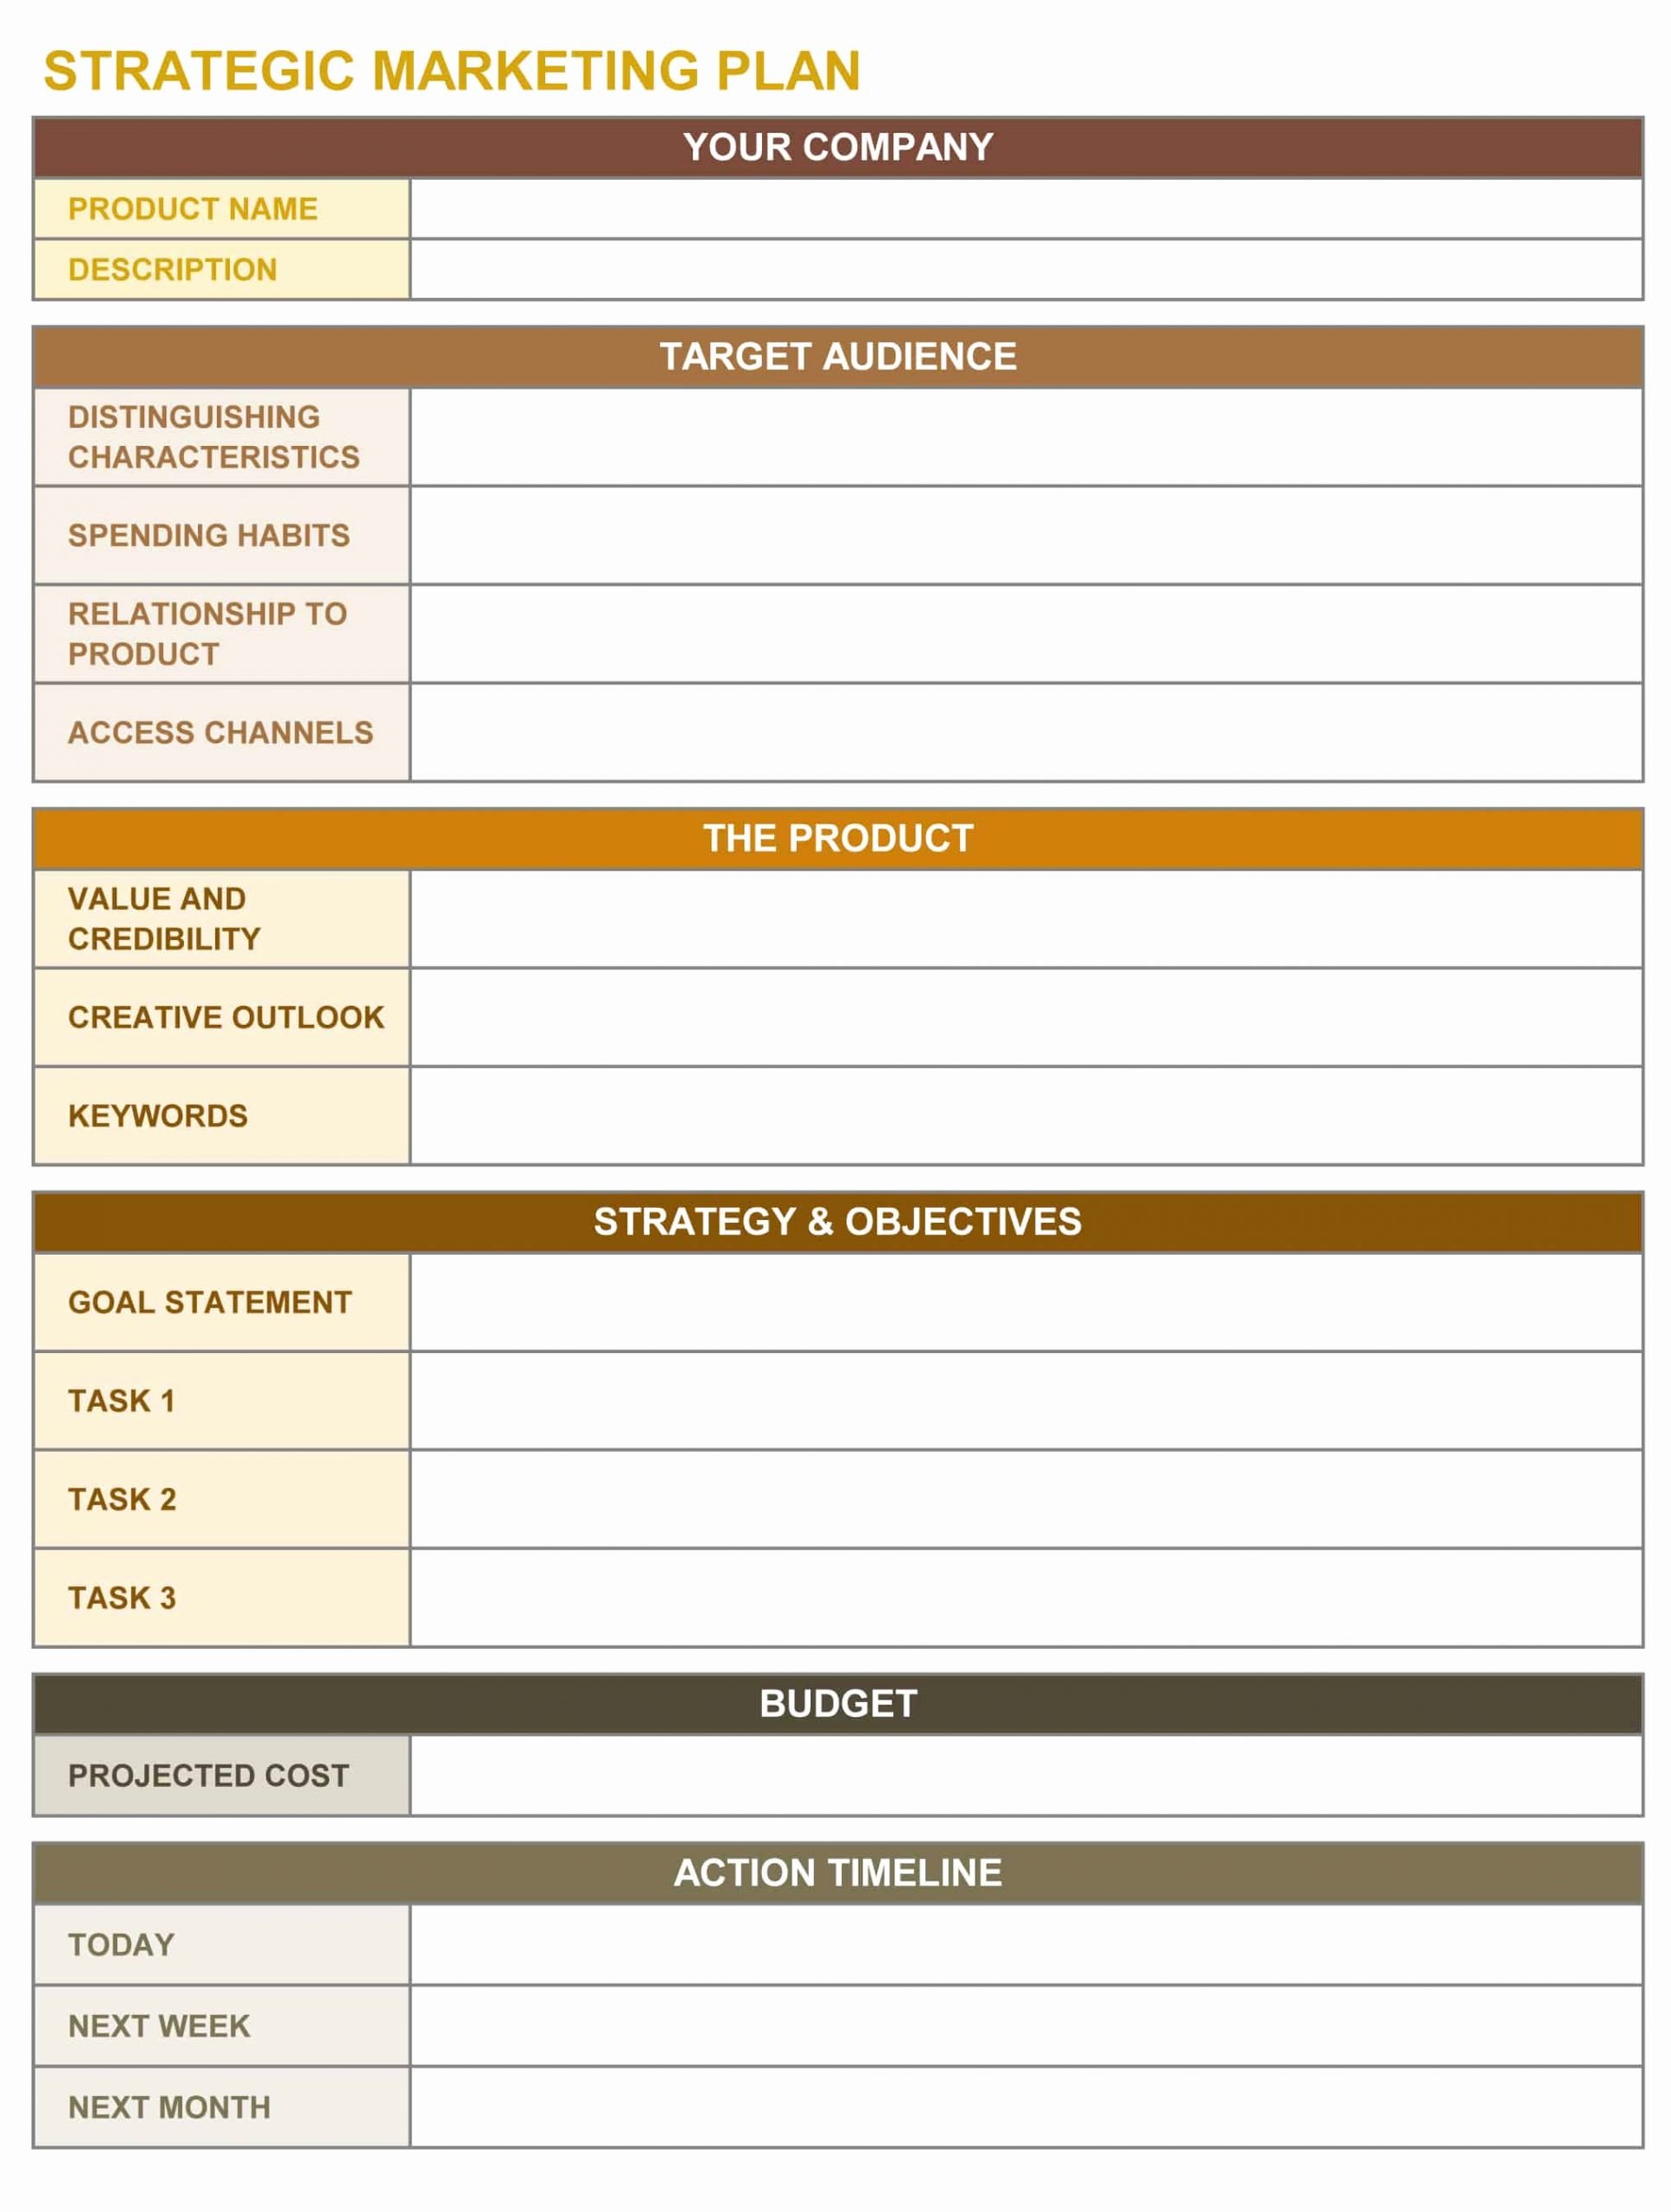 Strategic Planning Template Free Awesome 9 Free Strategic Planning Templates Smartsheet